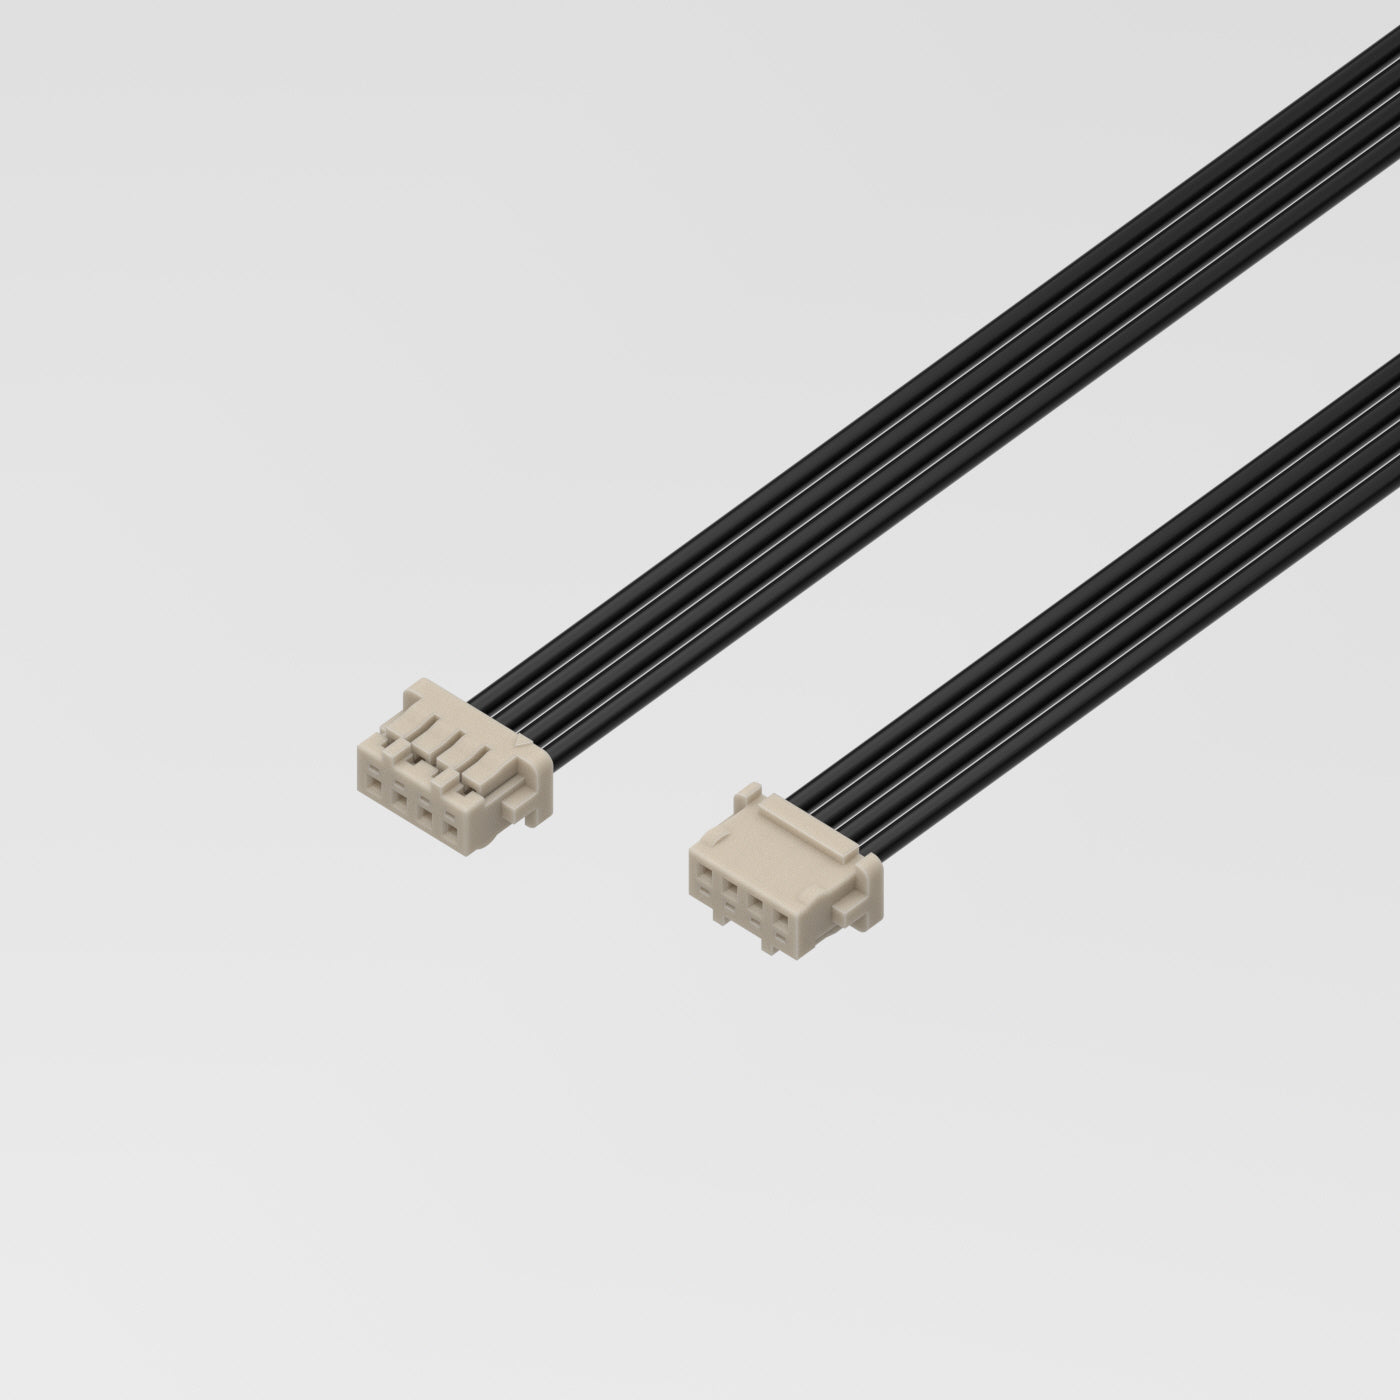 DF-13 4 pin cable